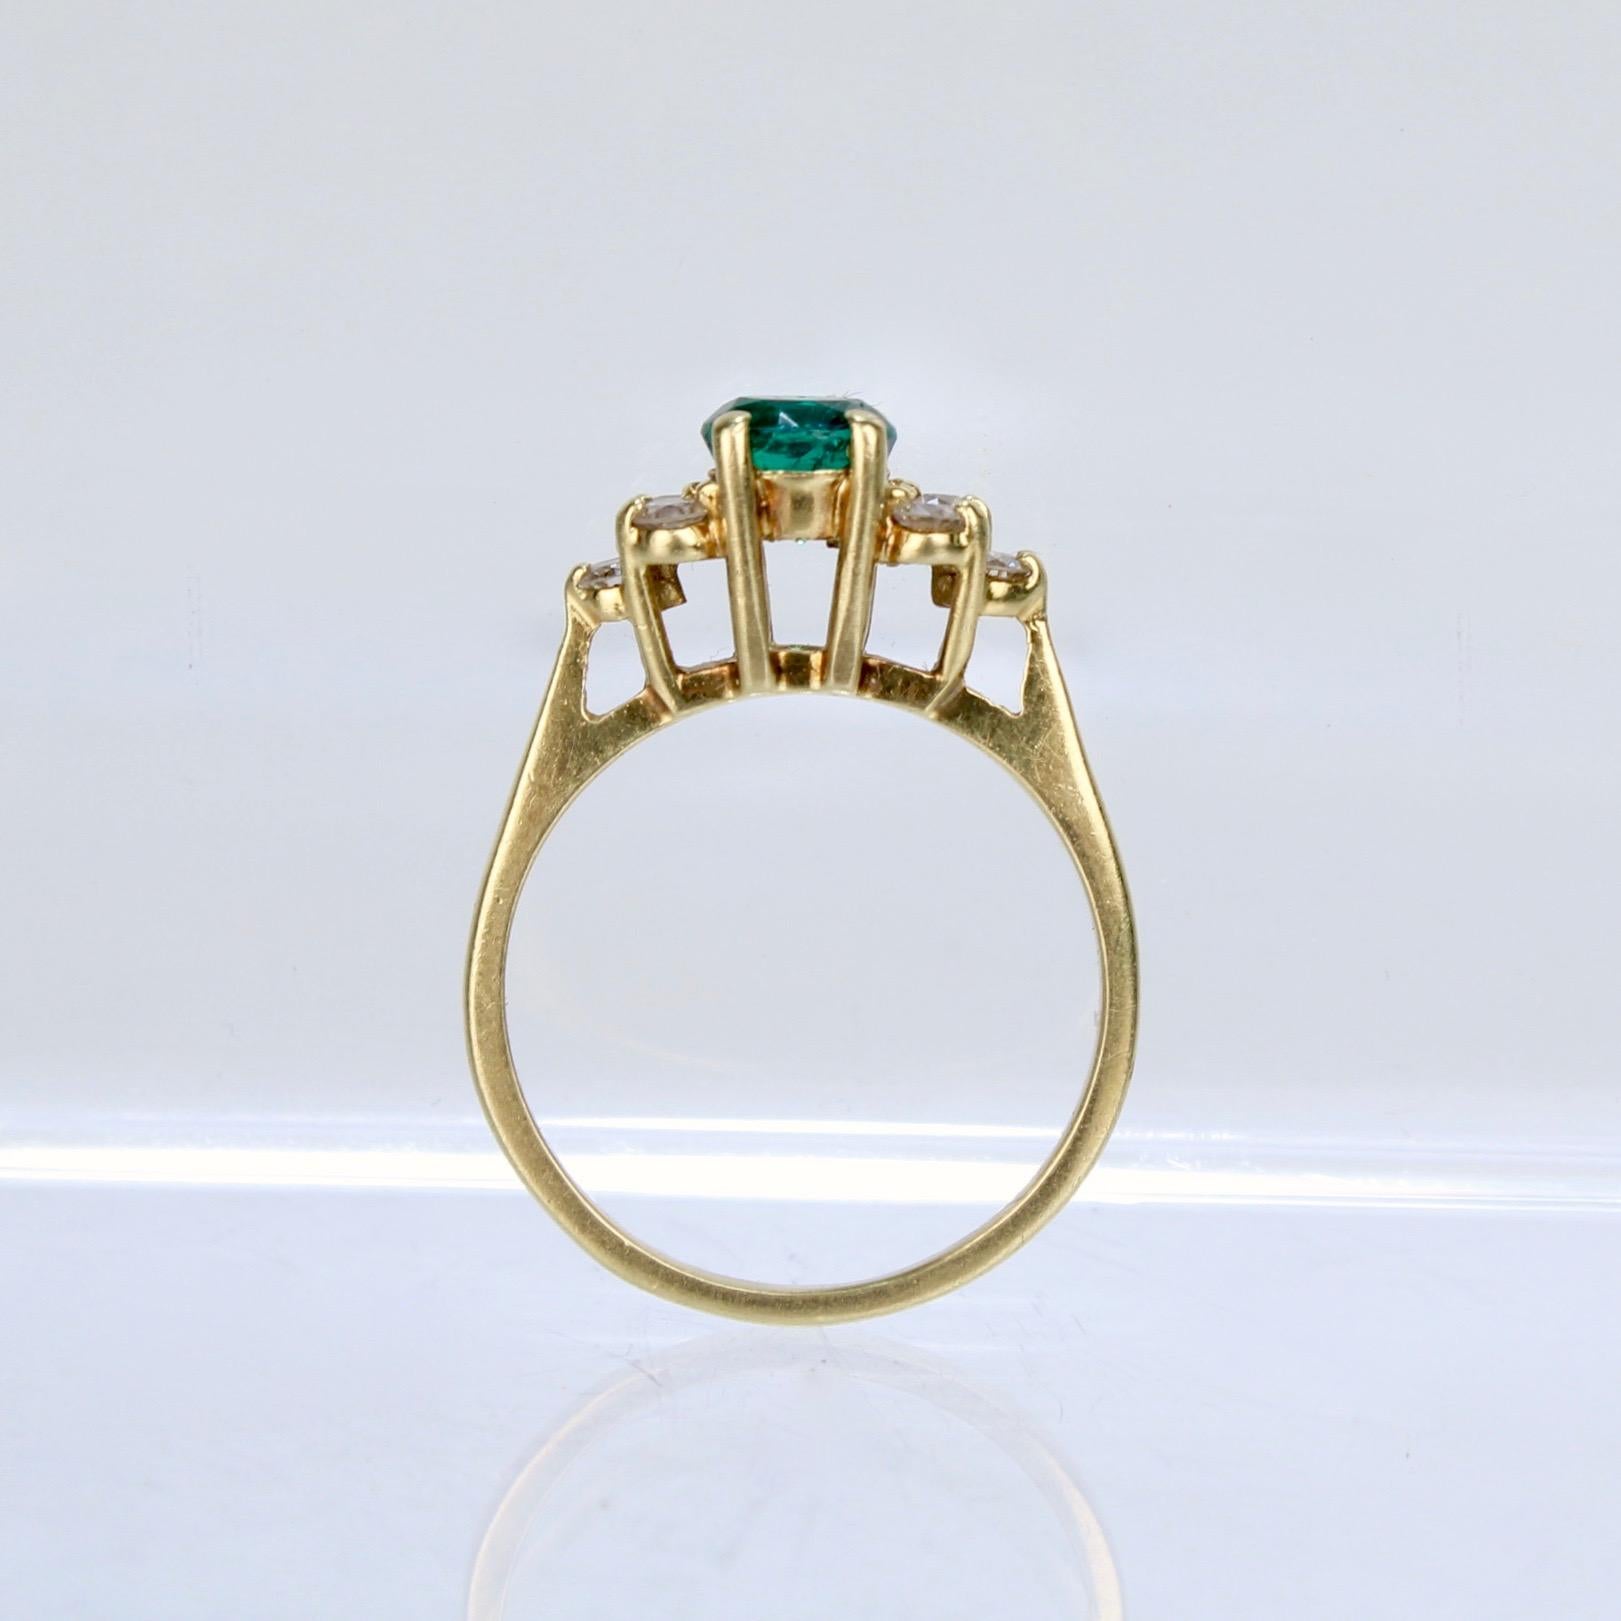 A wonderful Cartier 18k gold, diamond and emerald cocktail ring.

With a round-cut emerald set at its center and flanked on each side by a cluster of 3 white diamonds. 

Each stone is prong set above a gallery with openwork. 

Simply a wonderful